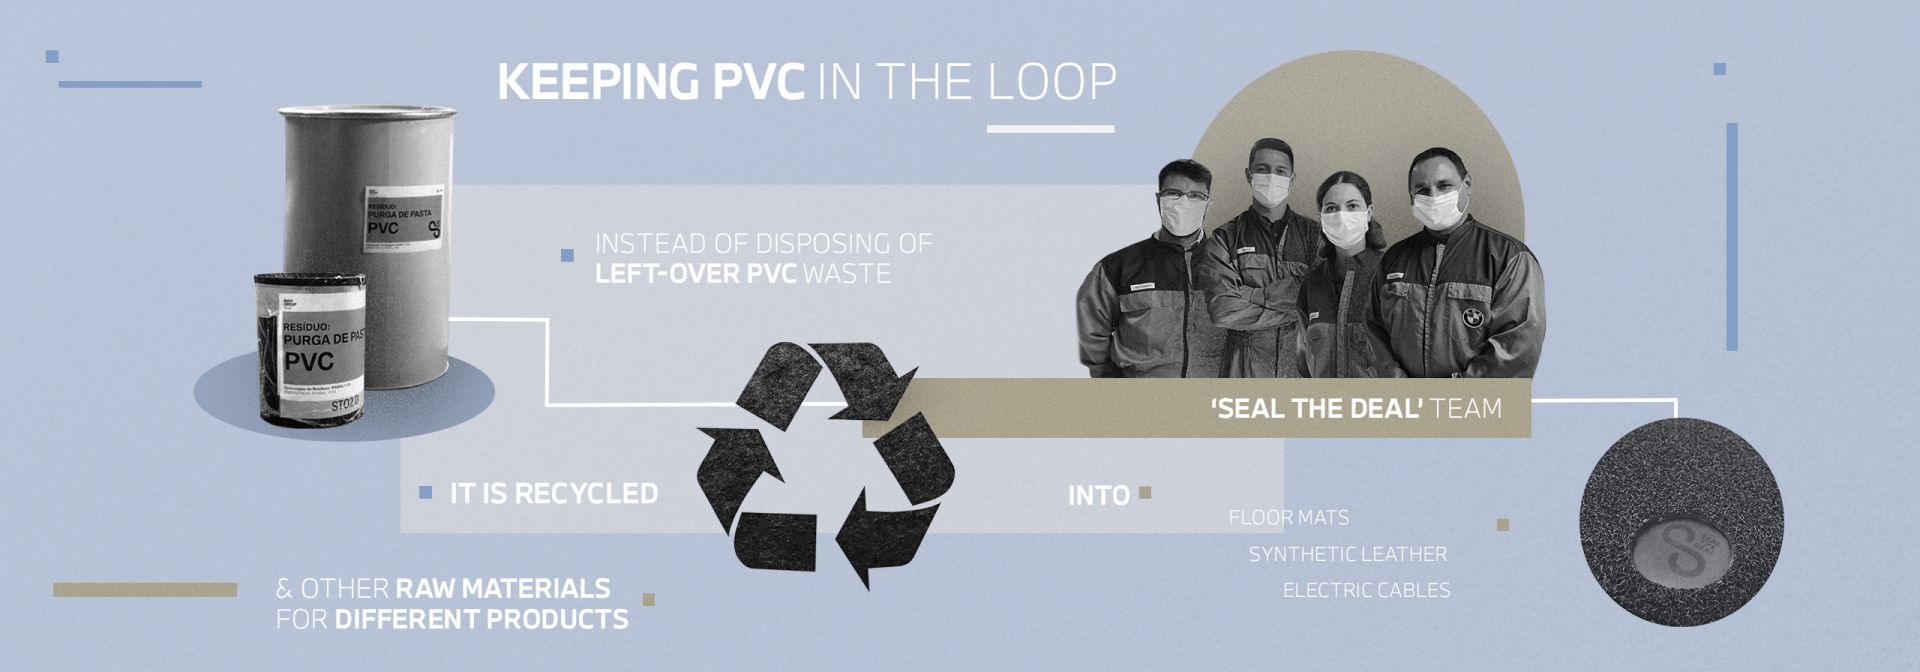 Keeping PVC in the loop Graphics